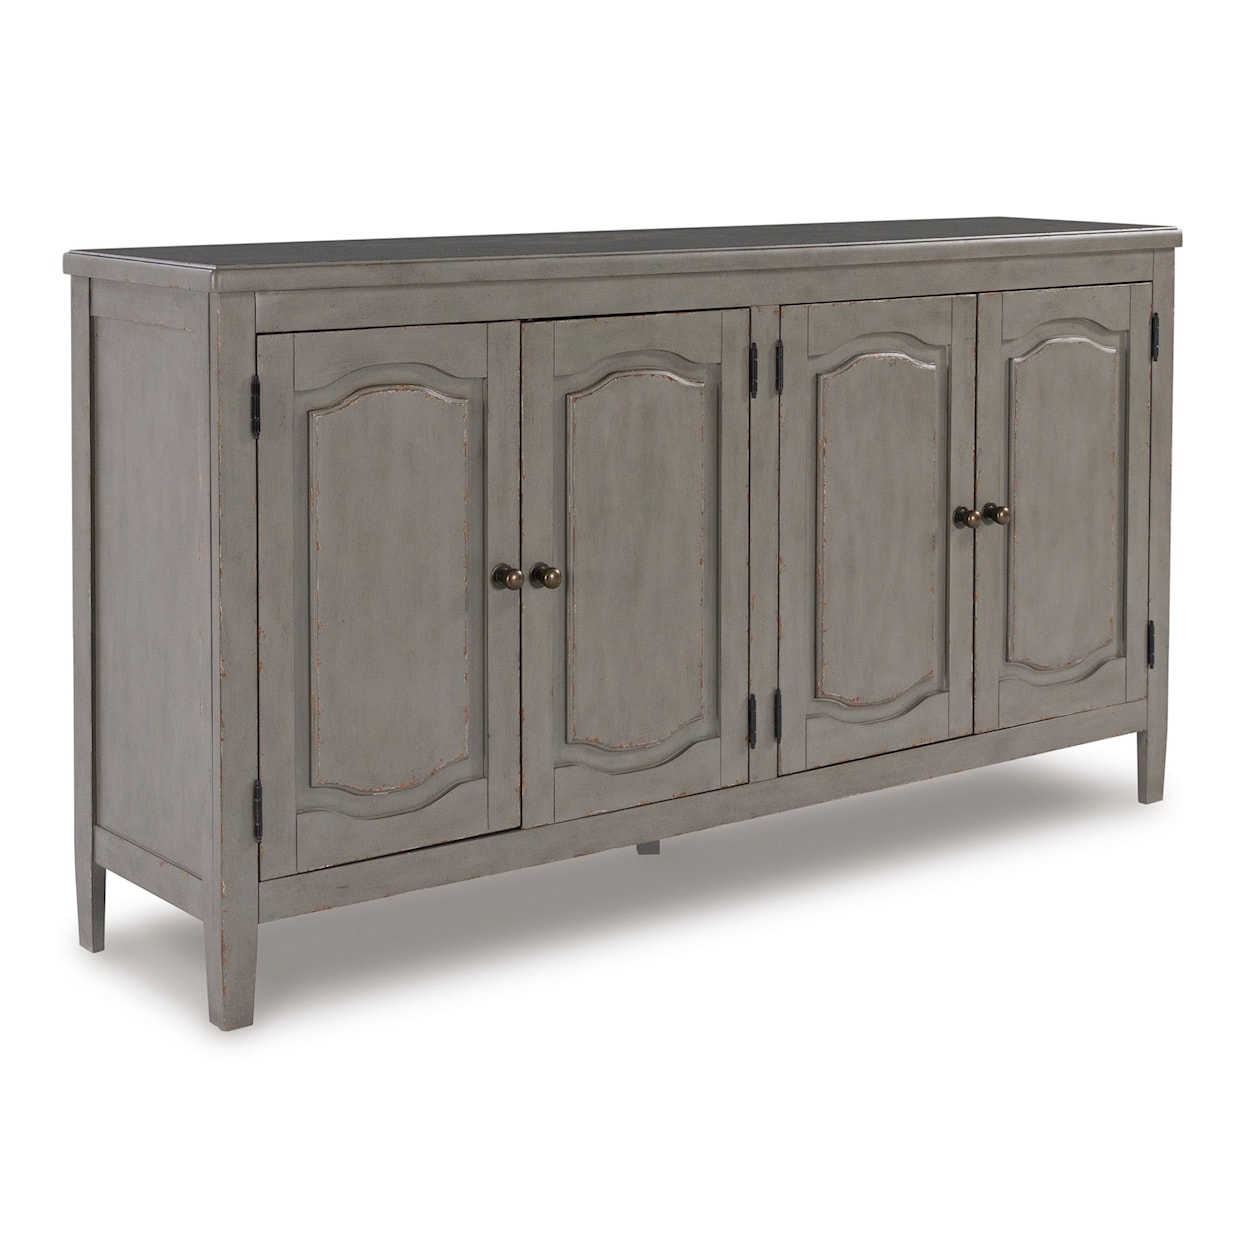 Benchcraft Charina Accent Cabinet